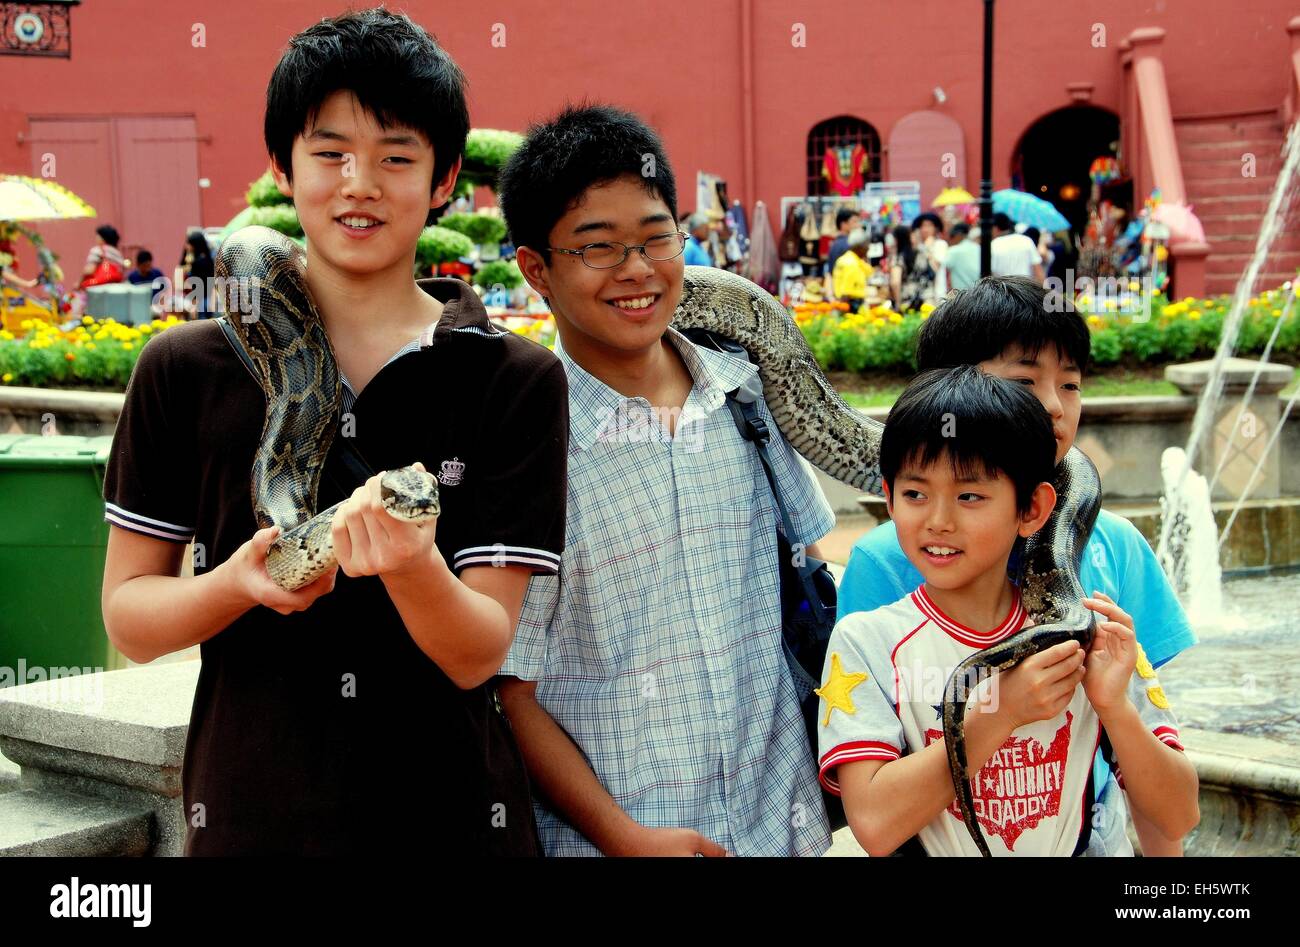 Melaka, Malaysia: Four Asian boys pose with a giant snake wrapped around their shoulders in Stadthuys Square Stock Photo